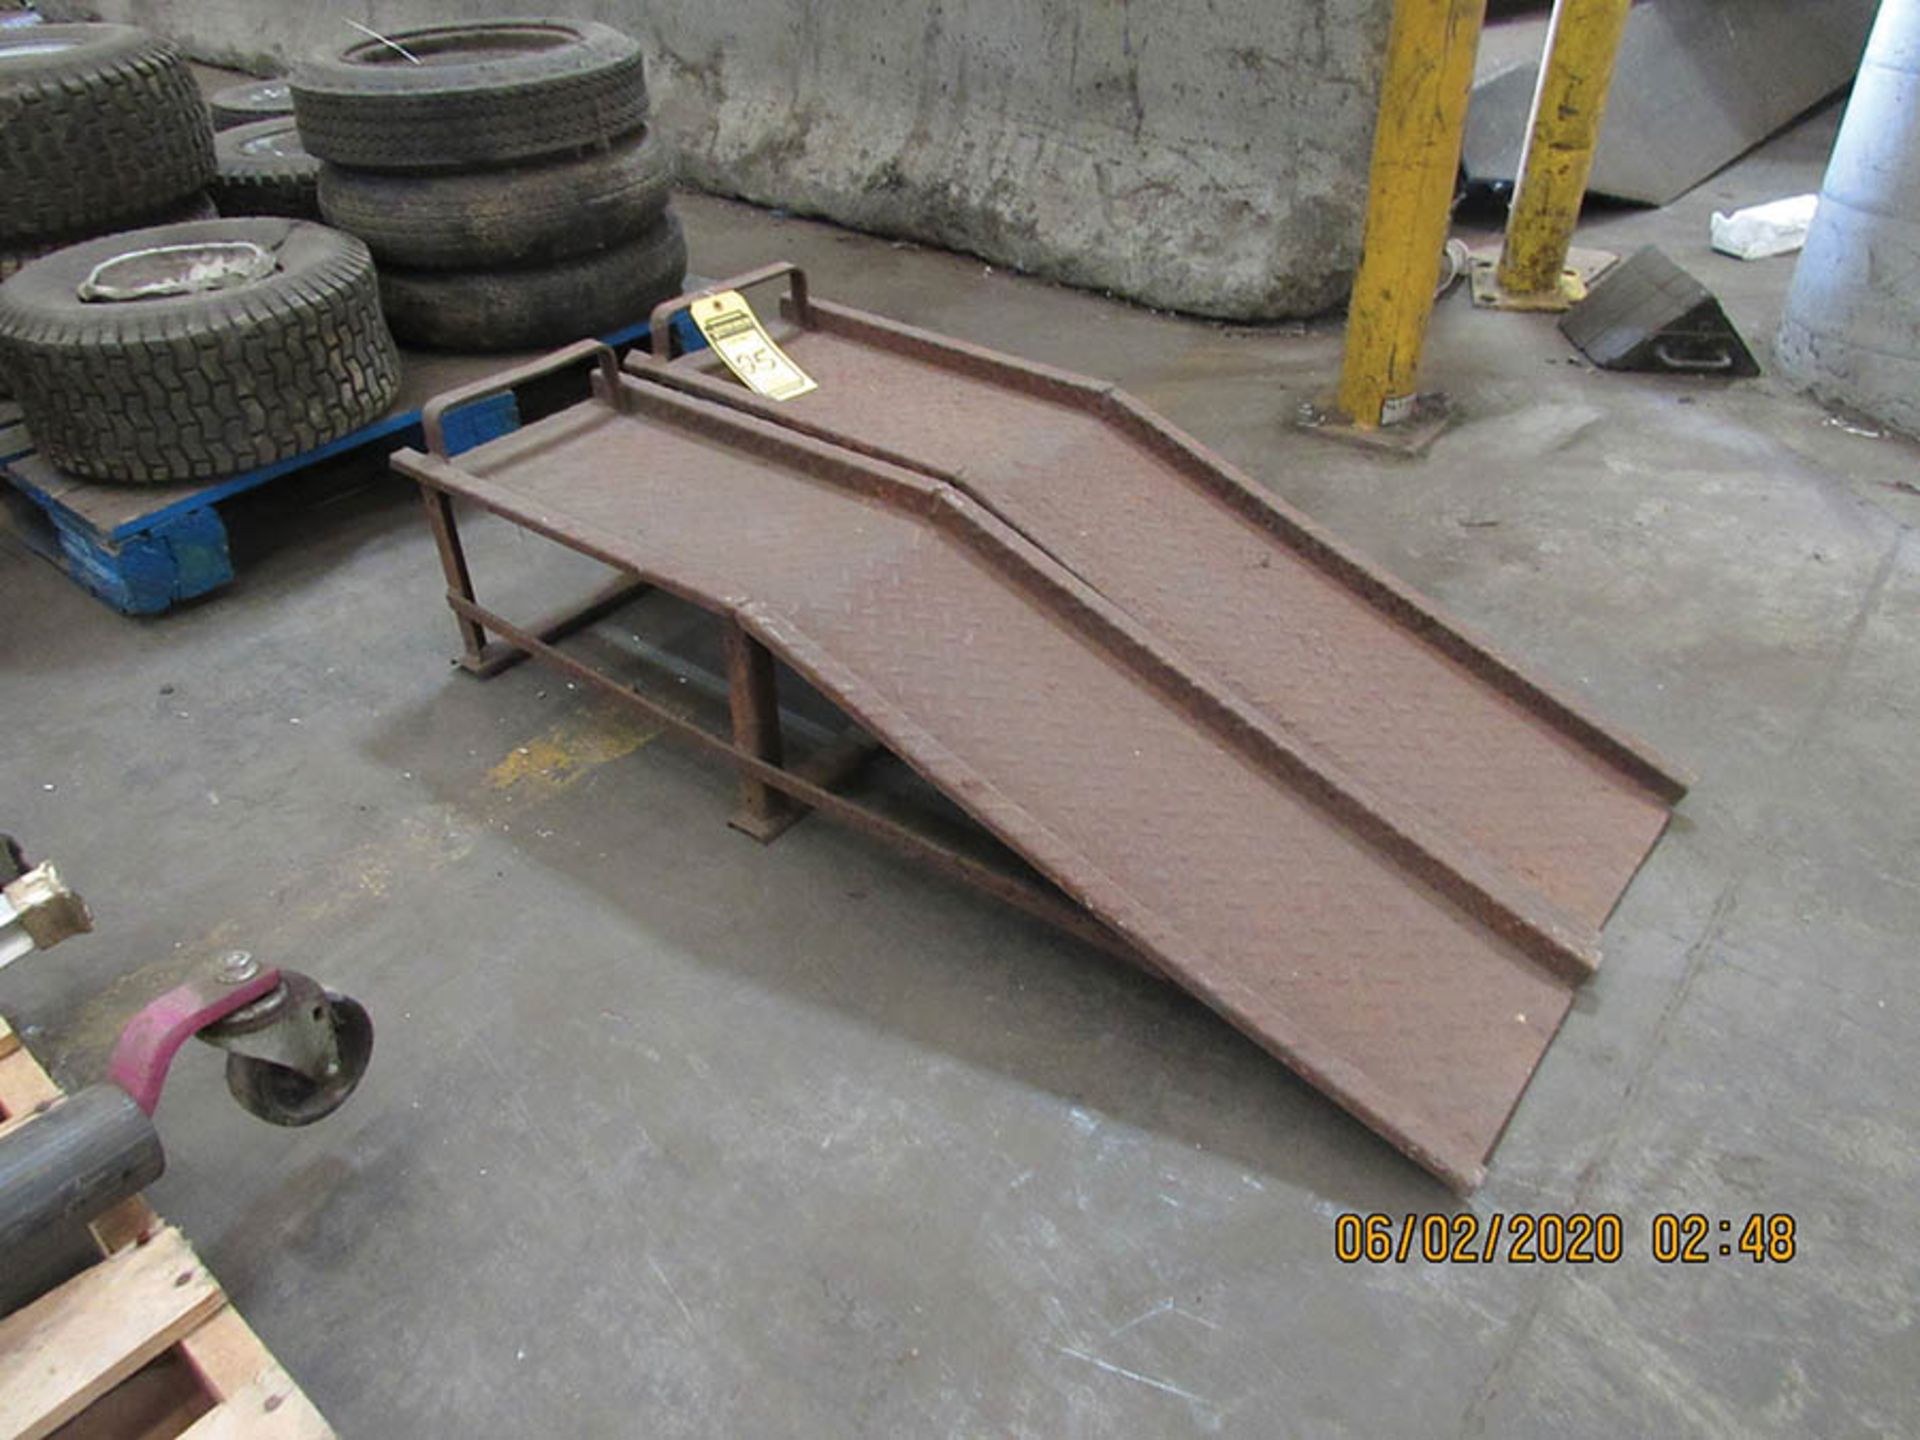 CAR RAMPS, ASSORTED LAWN MOWER TIRES W/ WHEELS 13 X 5 X 6 - 20 X 8 X 8 - 4.80 X 12 - Image 3 of 6